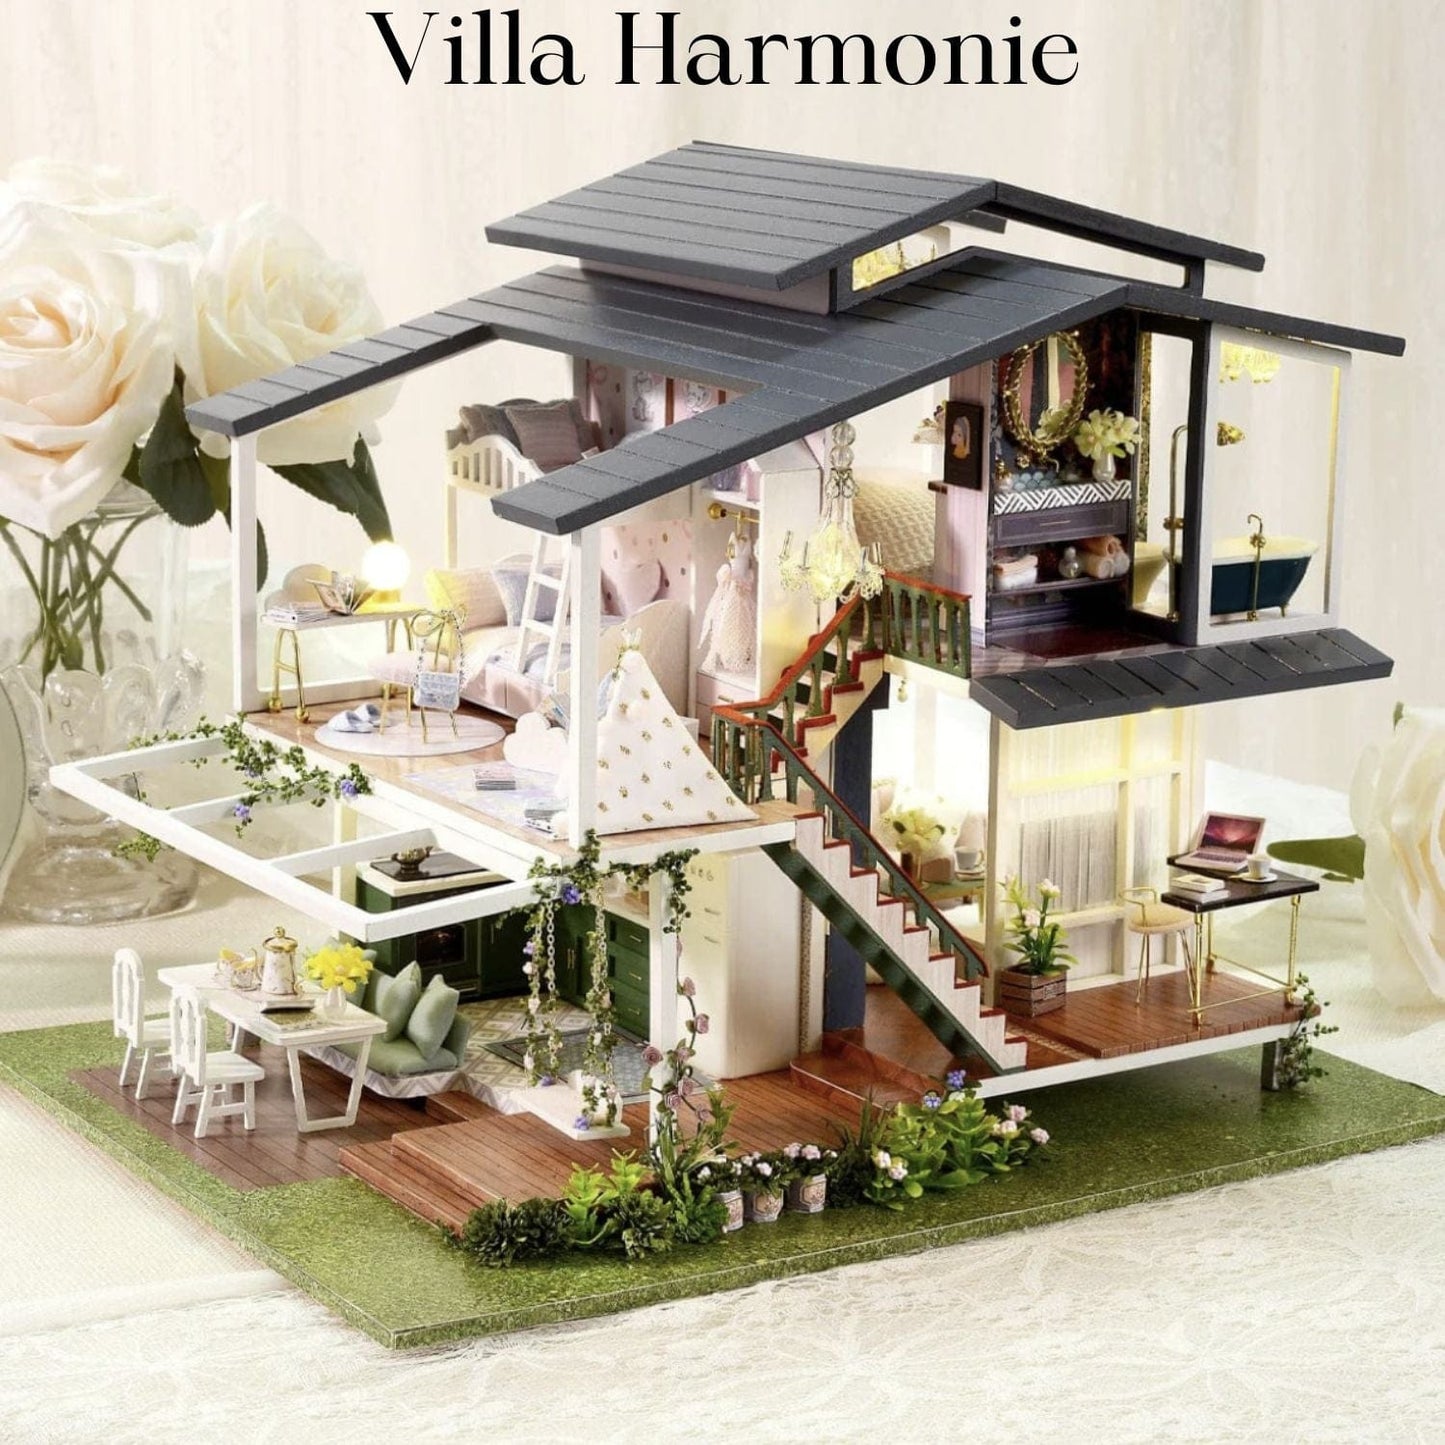 Pièces d'Exceptions Garden Villa Doll House Mini DIY Kit for Making Room Toys, Home Bedroom Decoration with Furniture, Wooden Crafts 3D Puzzle Girl